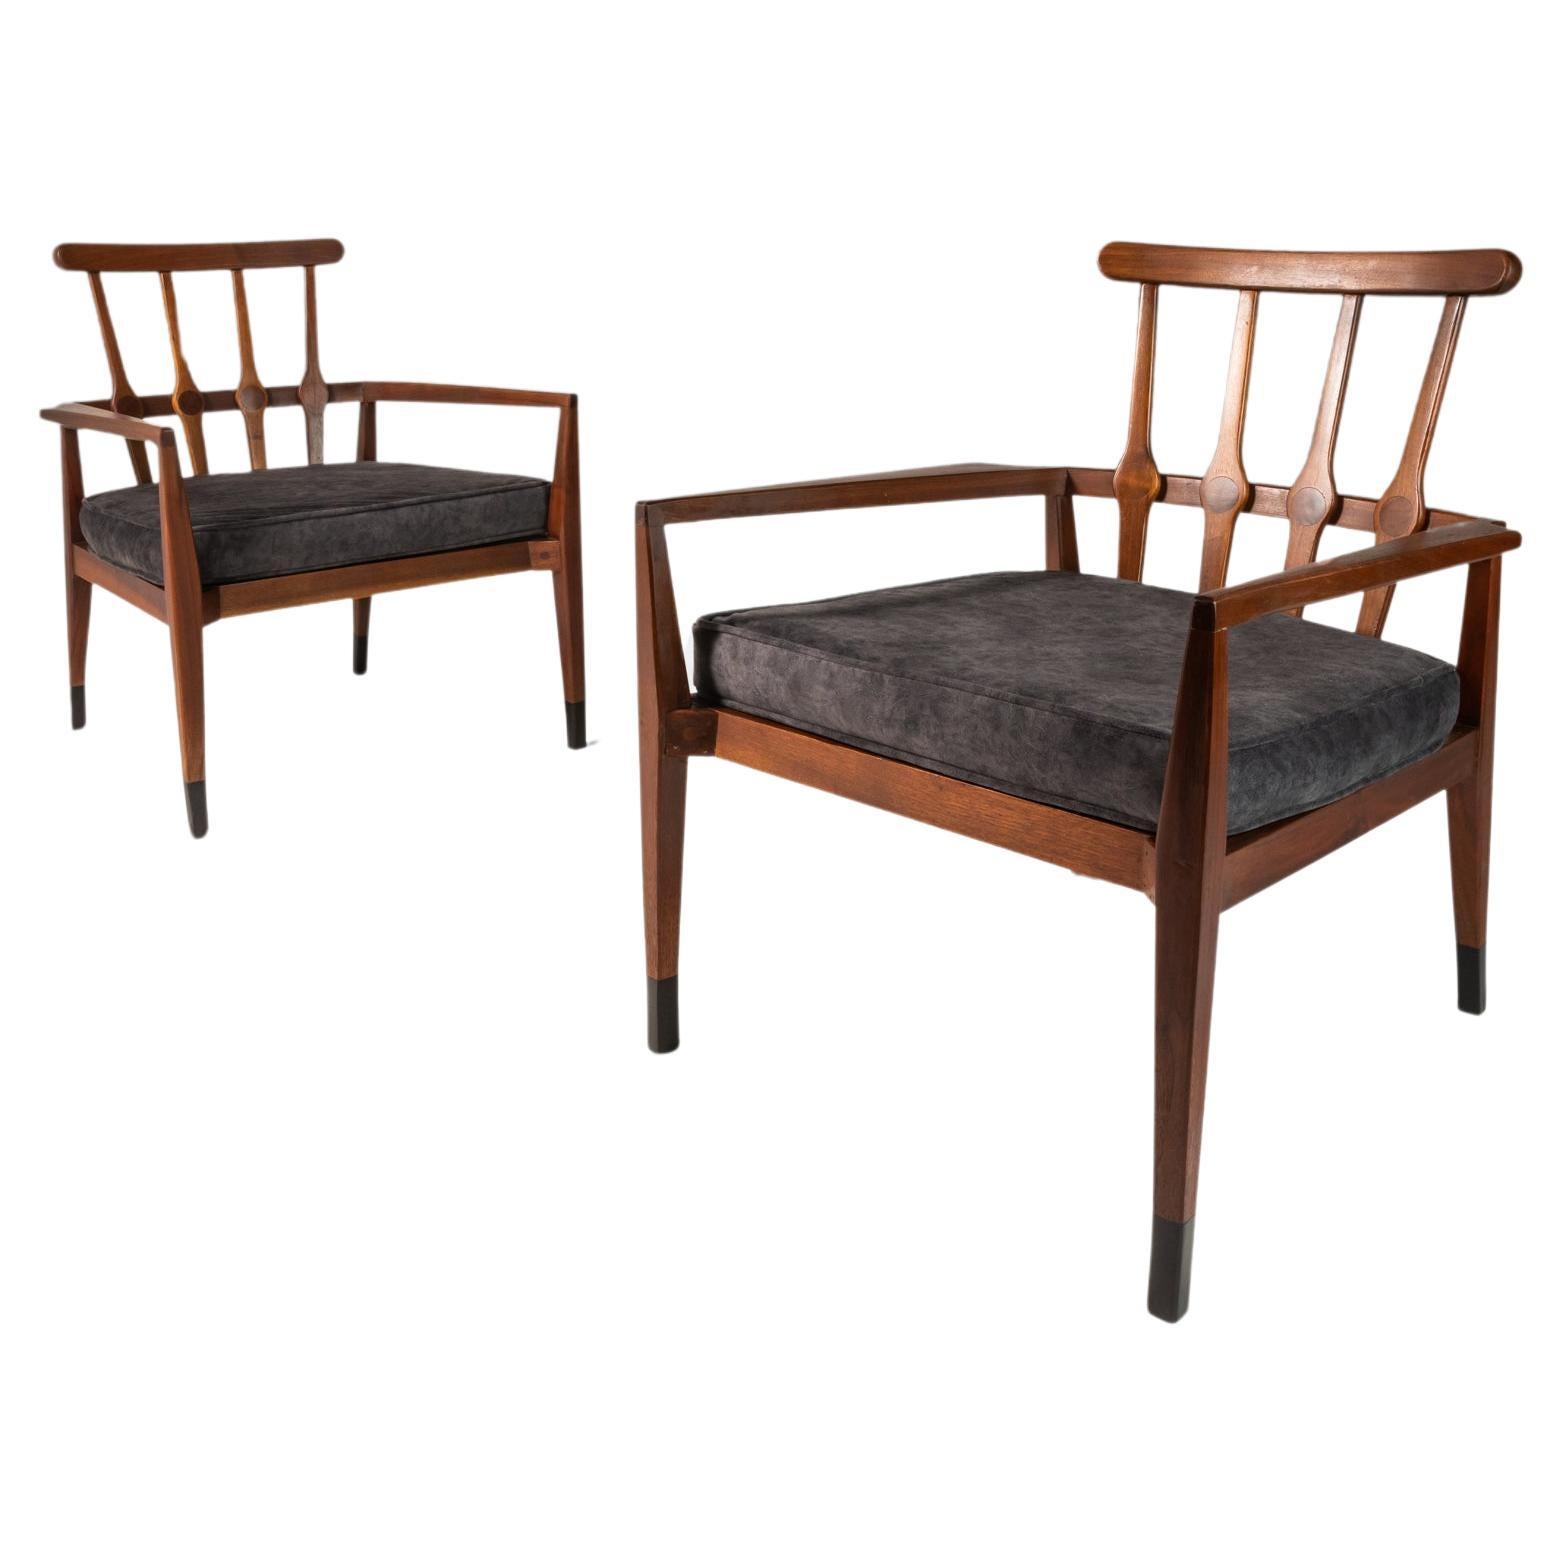 Set of Two (2) Angular Arm Chairs in Walnut & Velour by Foster McDavid, c. 1960s